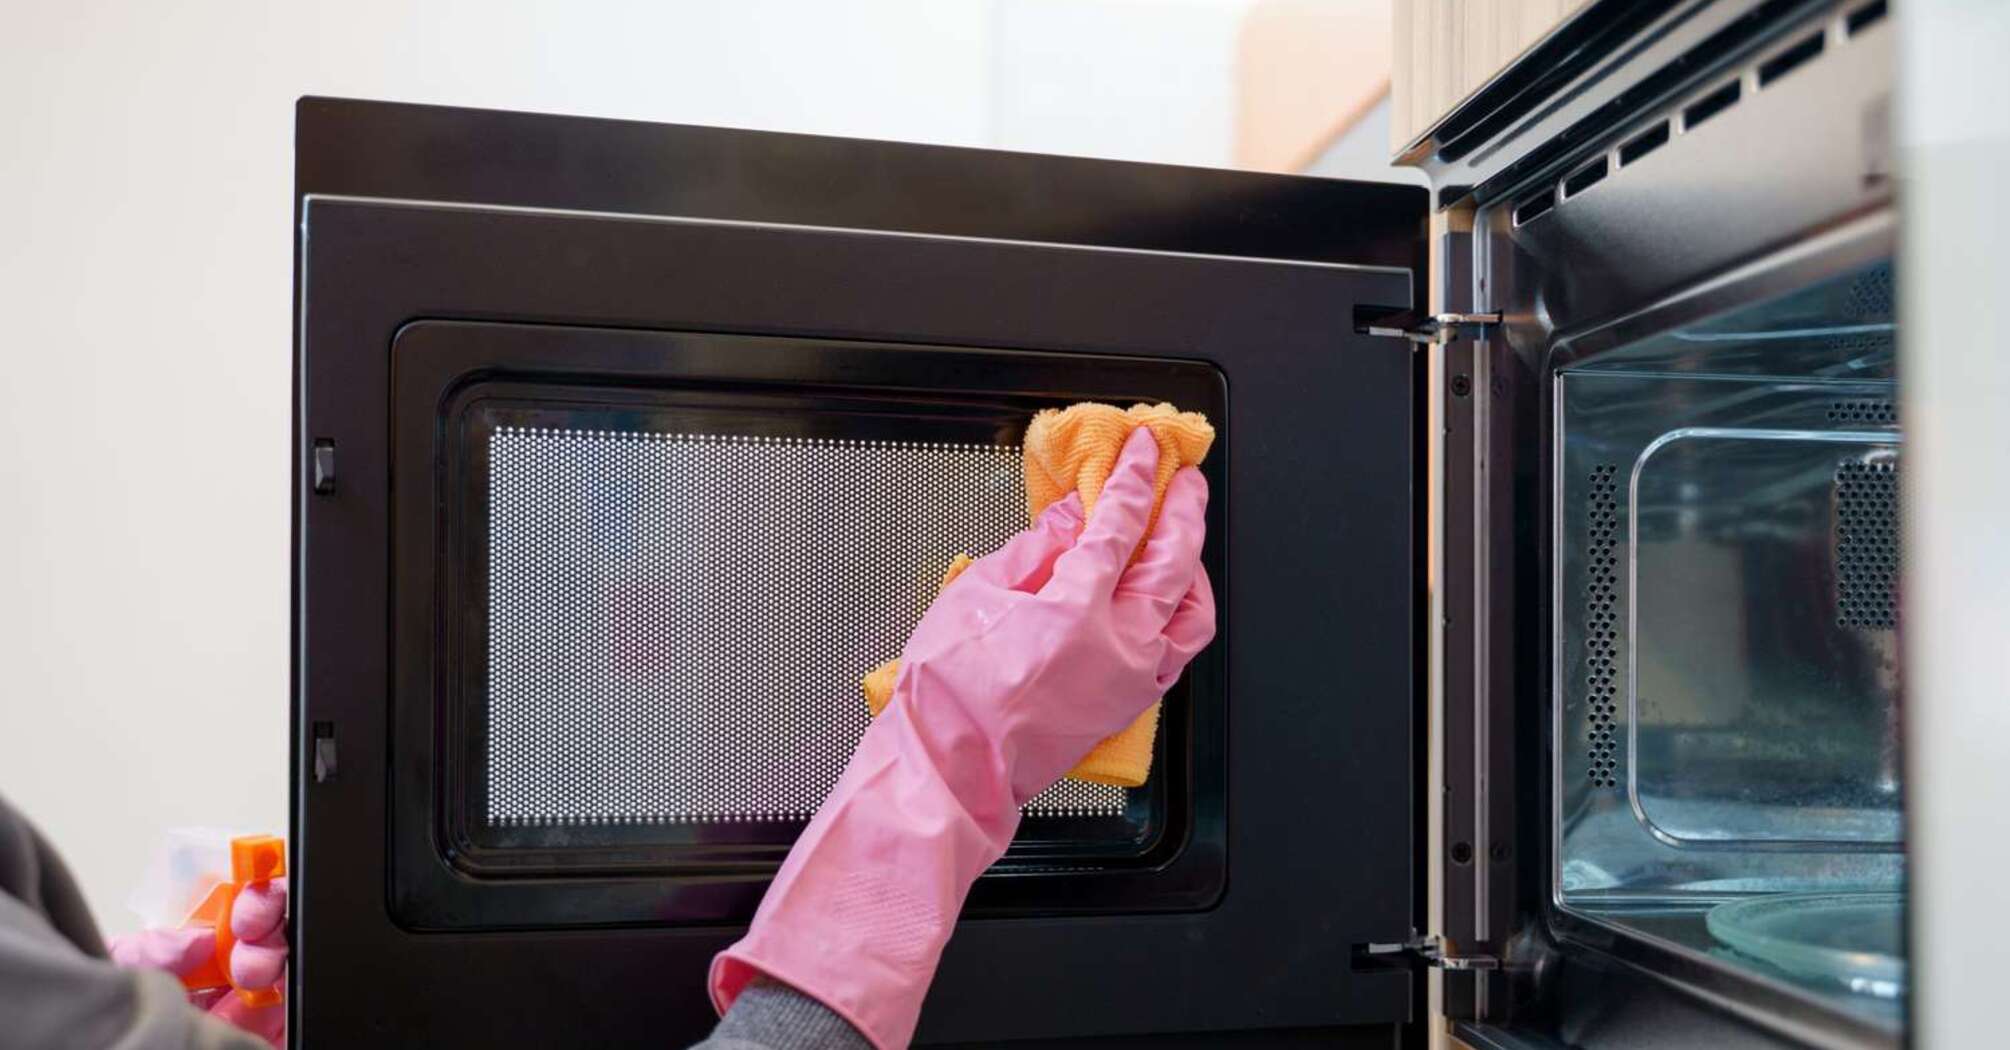 How to quickly clean the microwave oven from grease